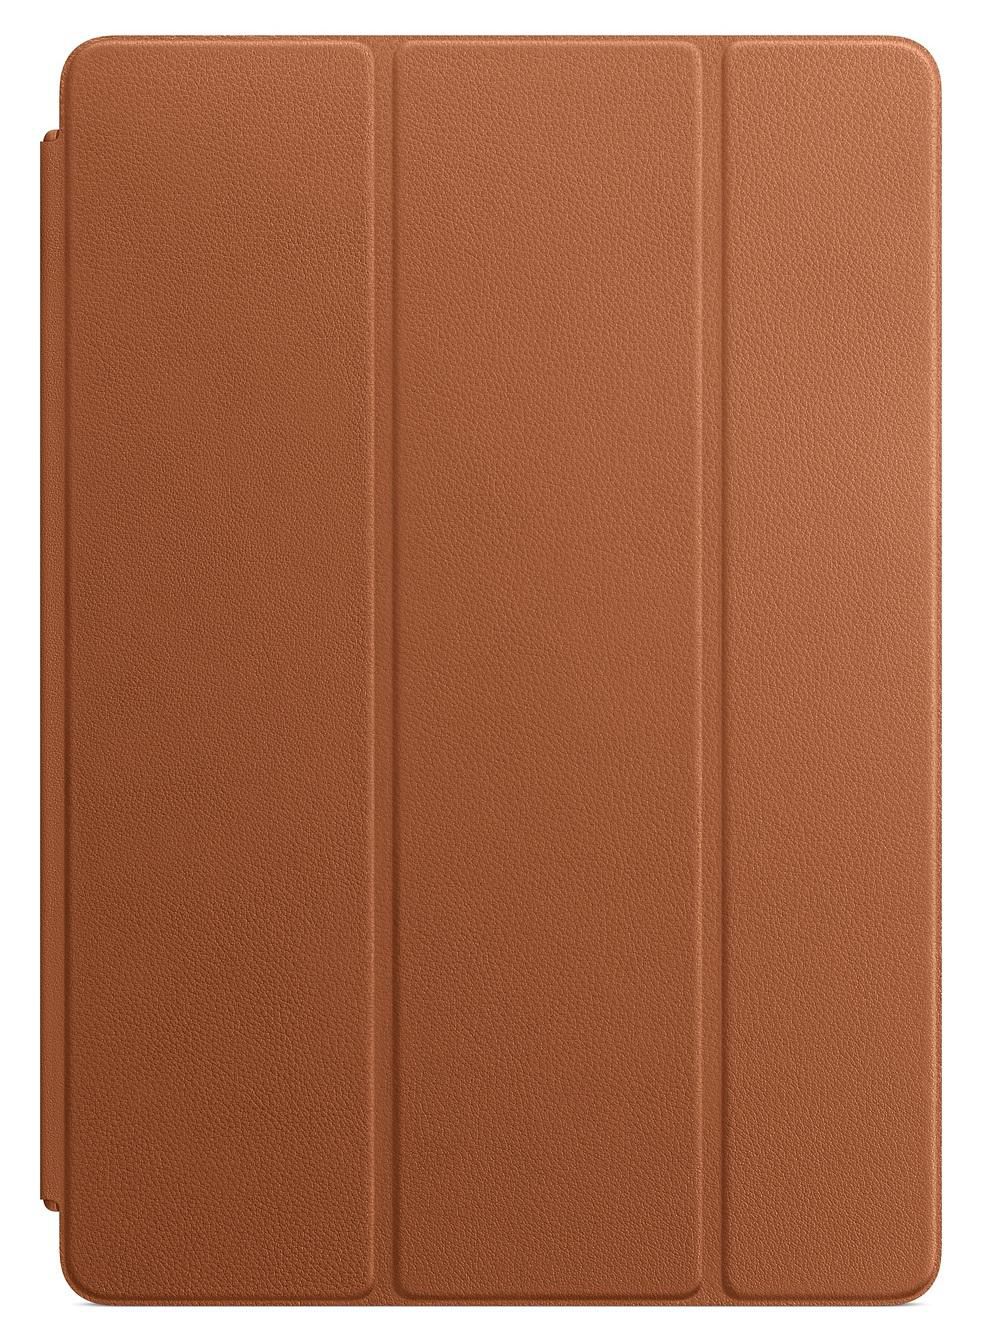 APPLE Leather Smart Cover for 10.5-inch iPad